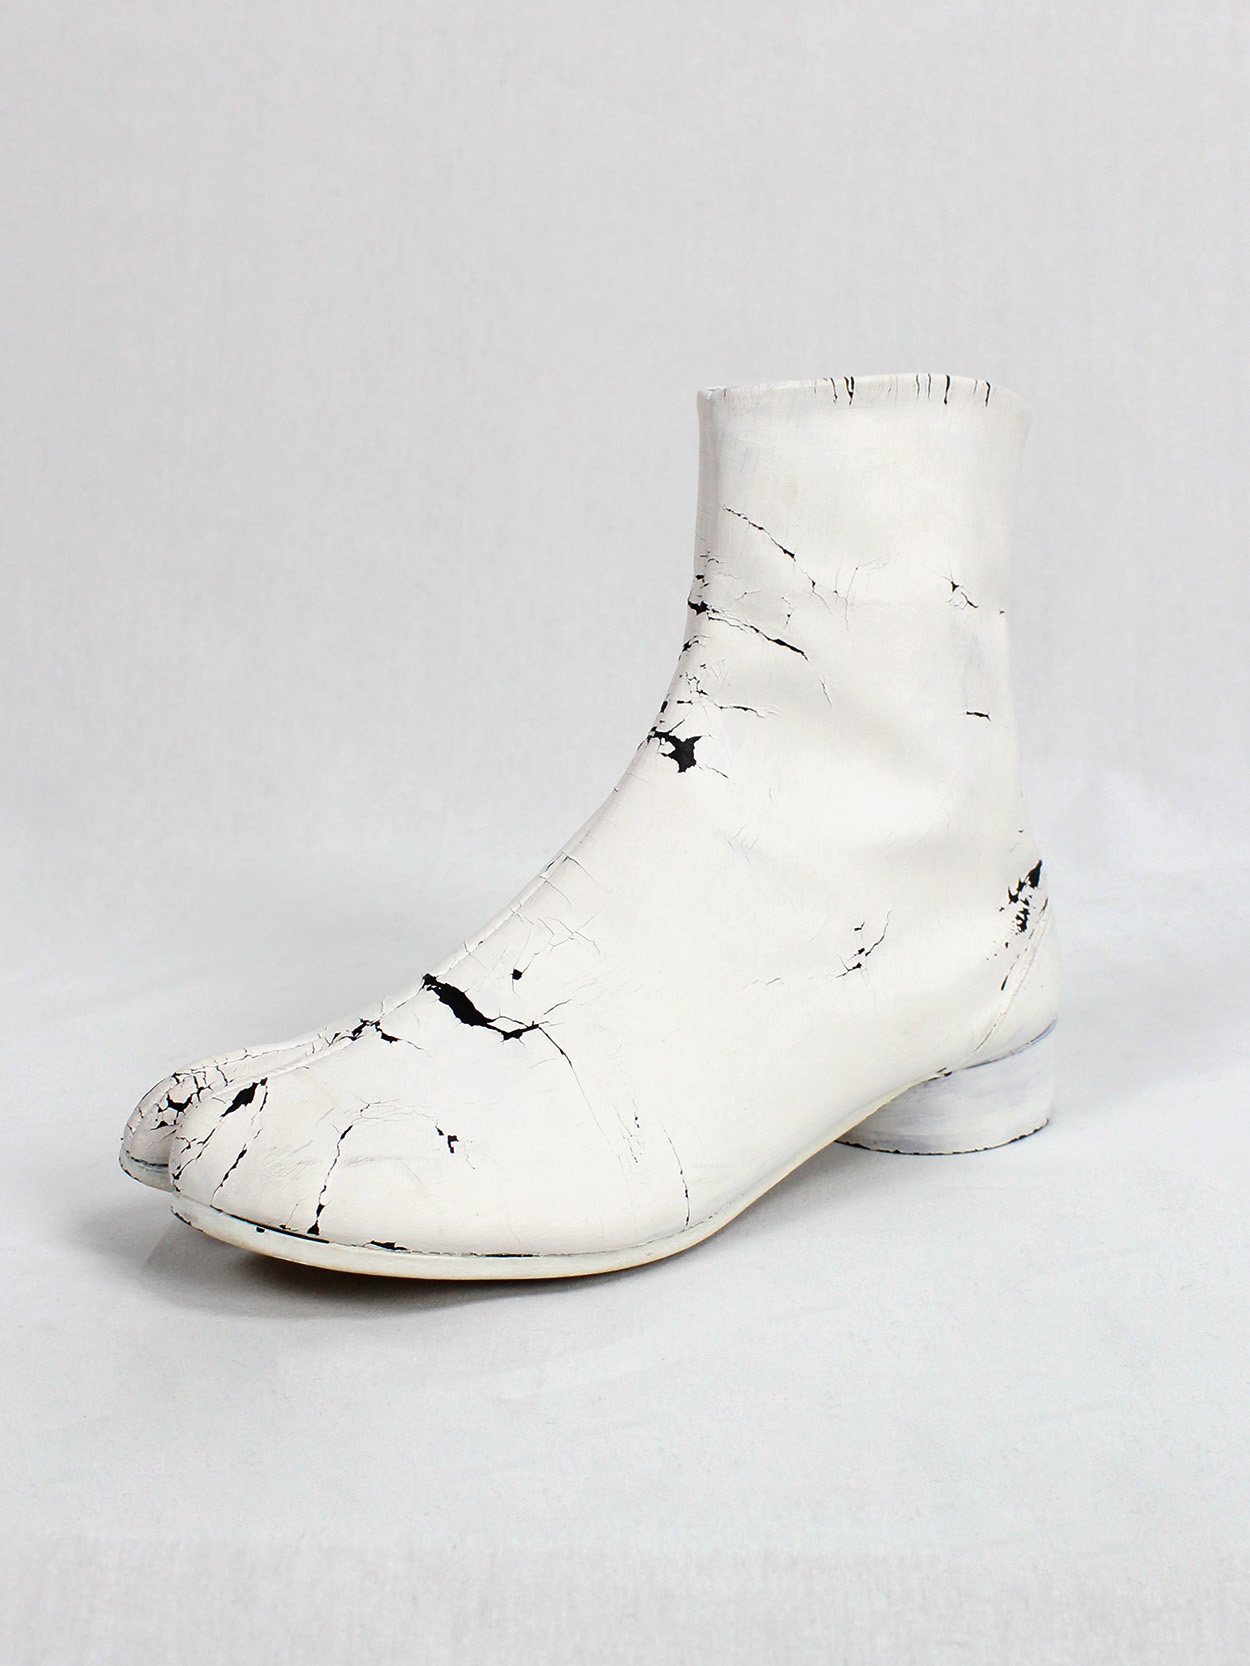 Maison Martin Margiela white painted tabi boots with low heel fall 1998 (26)